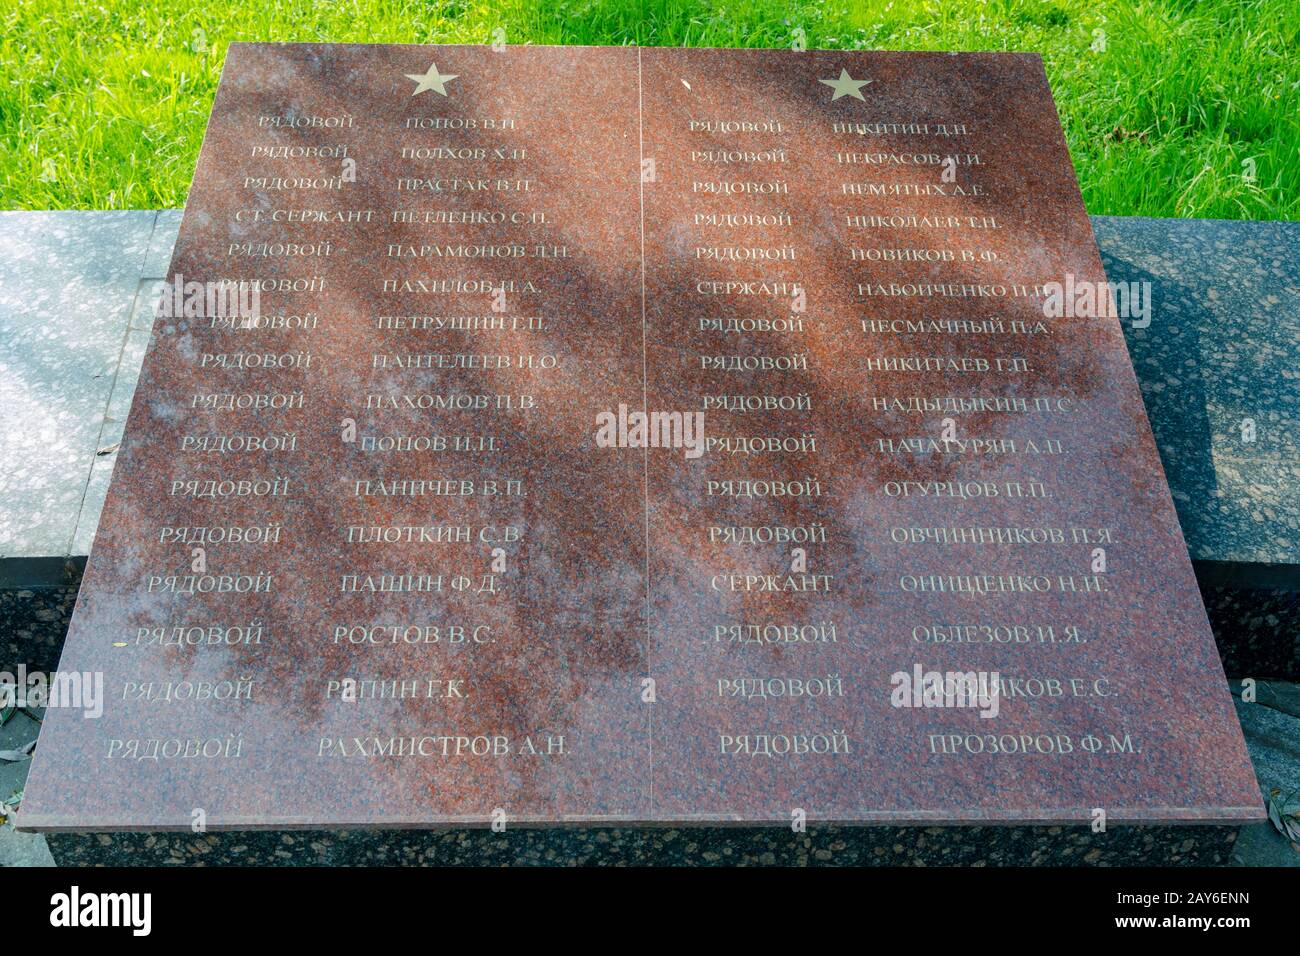 Sergiev Posad - August 10, 2015: The names of those buried in the mass grave of soldiers at the memorial winning glory in the Gr Stock Photo